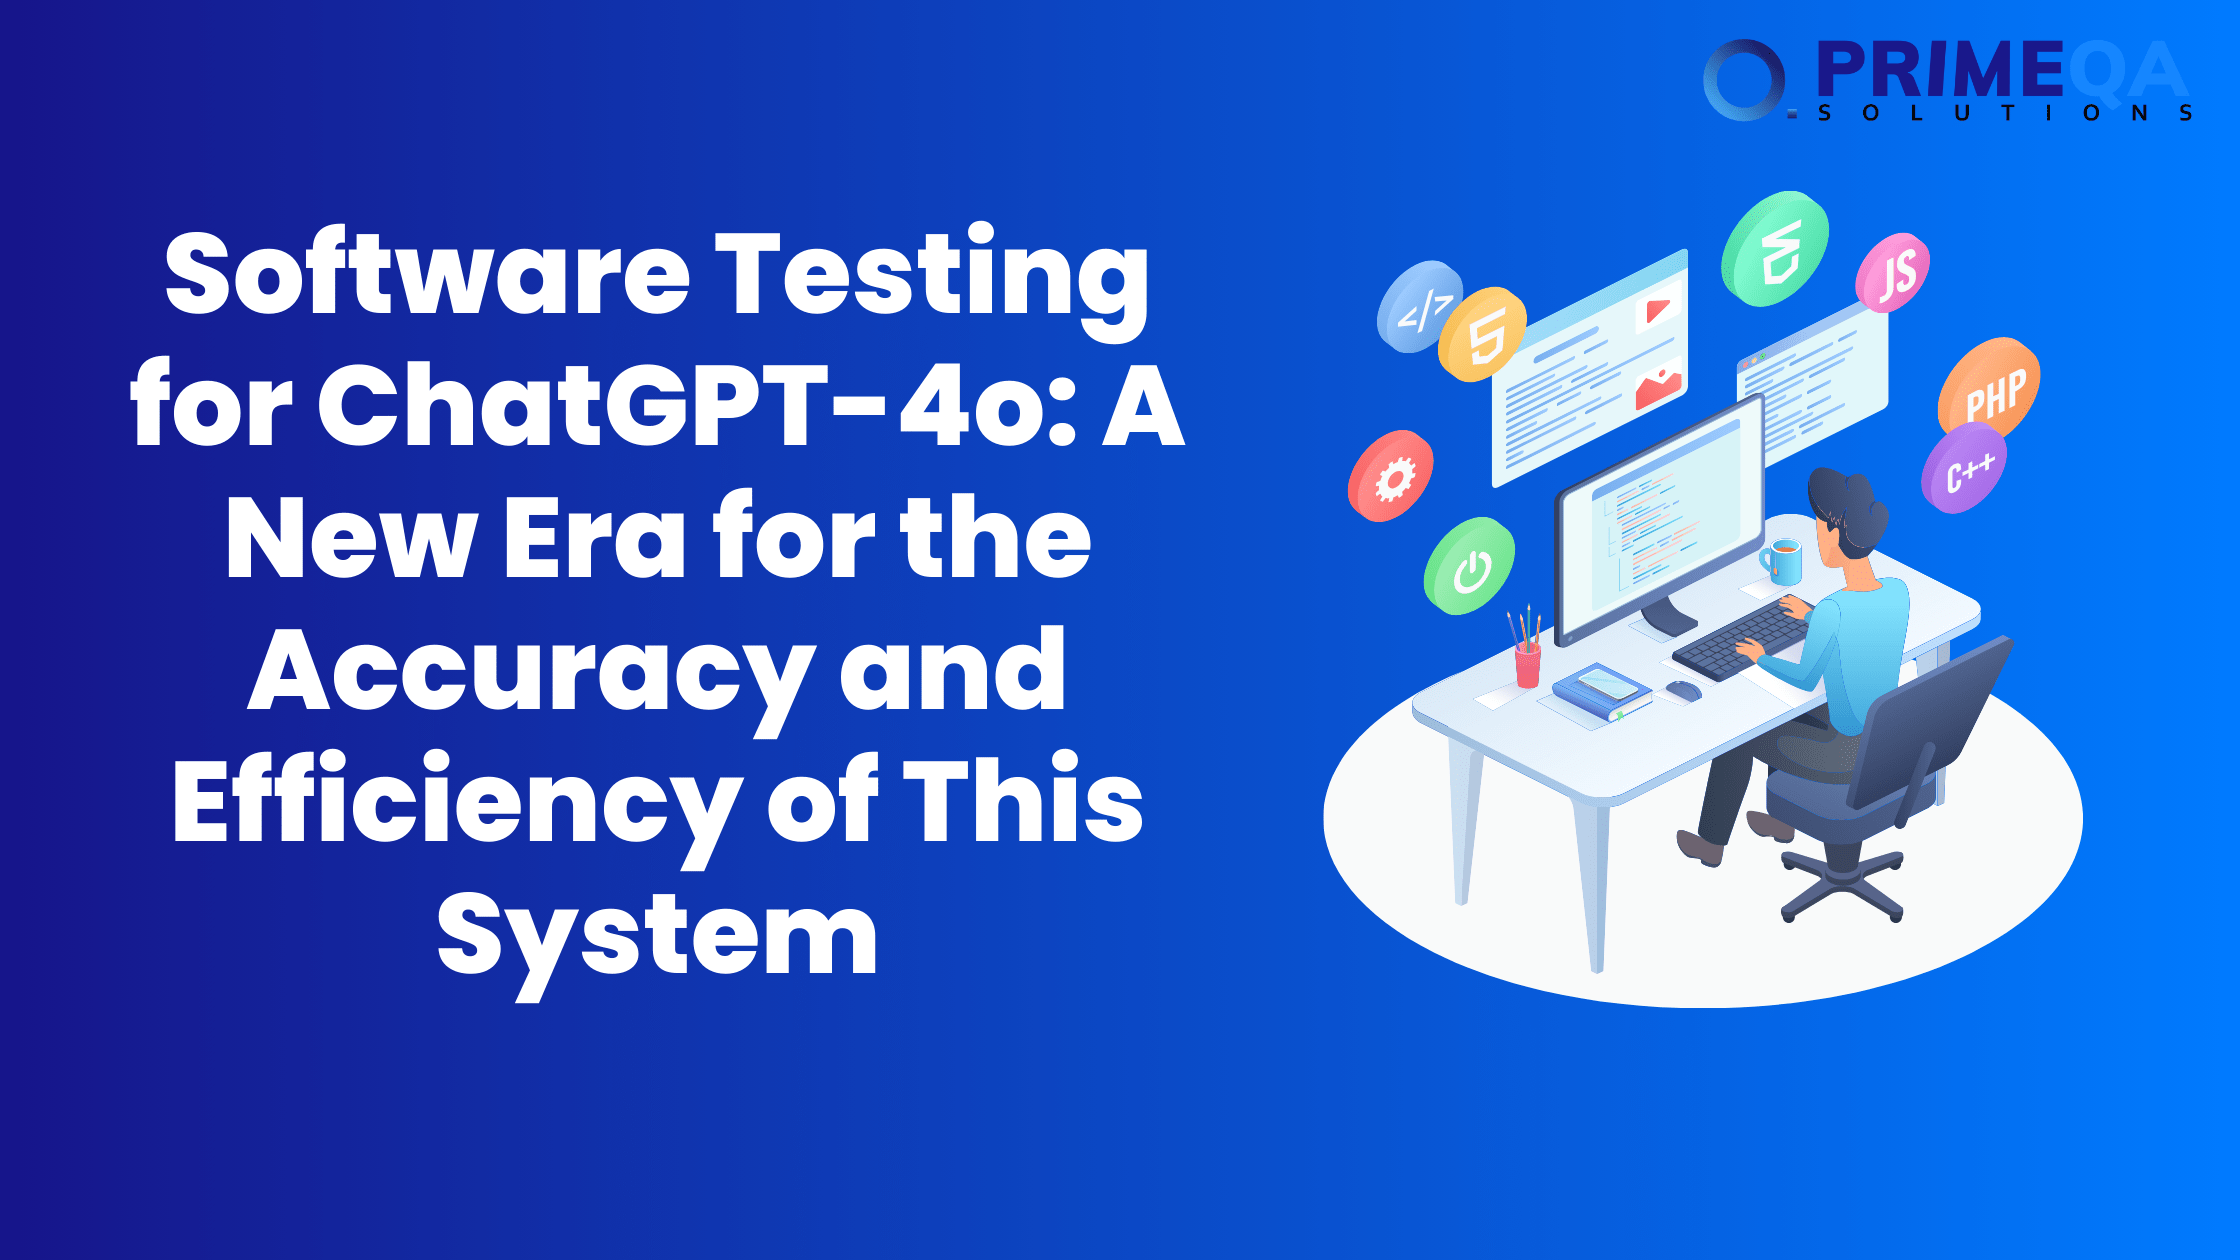 Software Testing for ChatGPT-4o